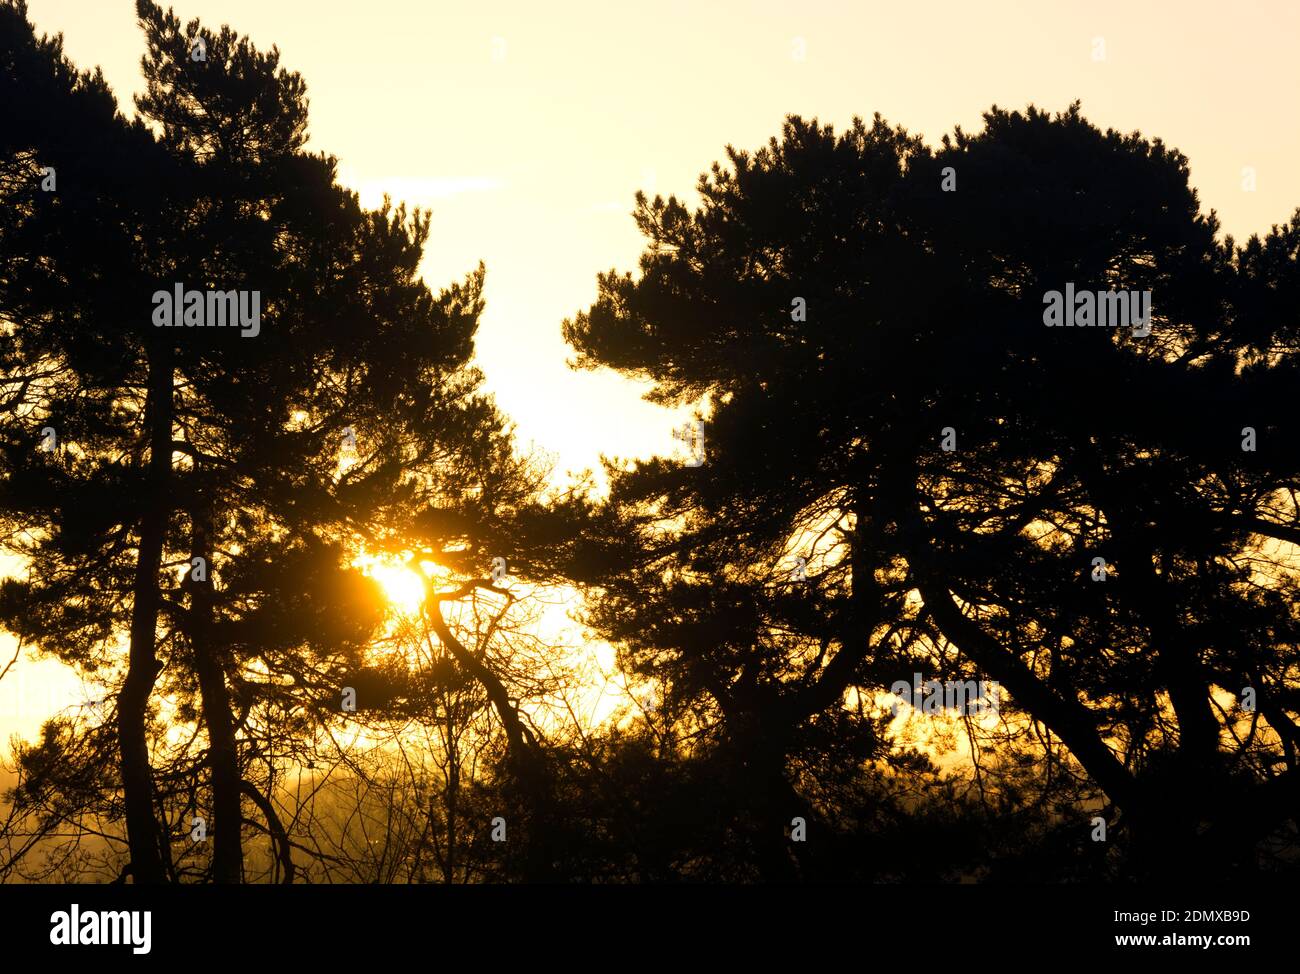 Coniferous trees silhouetted at sunrise in winter, Priory Park, Warwick, Warwickshire, England, UK Stock Photo